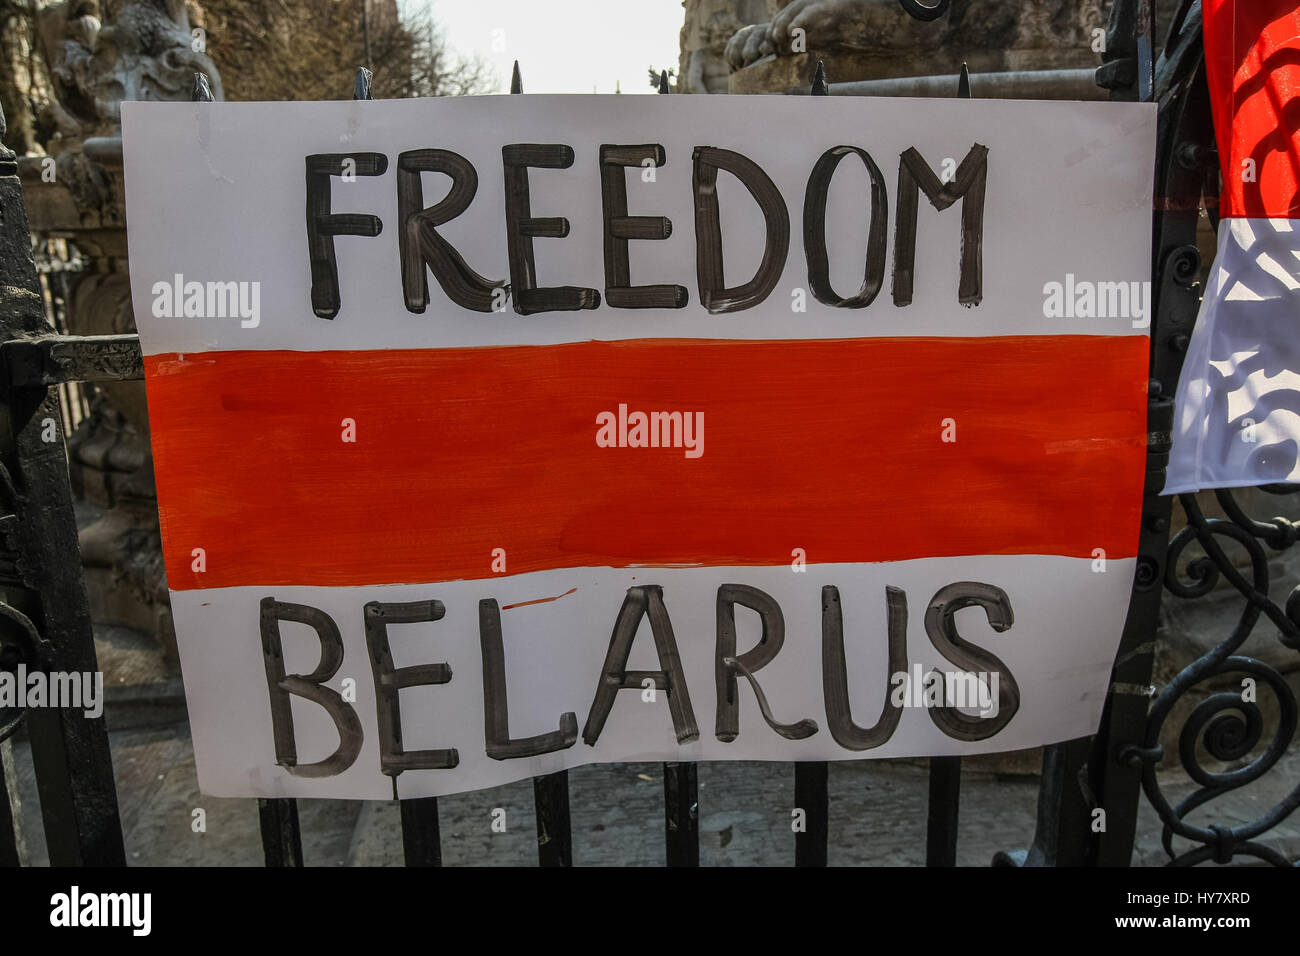 Gdansk, Poland. 02nd Apr, 2017. Freedom for Belarus slogan painted on hitorical Belarussian flag is seen  Gdansk, Poland on 2 April 2017  . Belarussian opposition activists and students living in Poland organized demonstartion to support protesters in Belarus, against President Alexander Lukashenko new tax levied against the unemployed in Belarus. Demonstrations and marches have been held in sites throughout the Belarus with sizes of several hundred to several thousand gathering at a given time. Credit: Michal Fludra/Alamy Live News Stock Photo